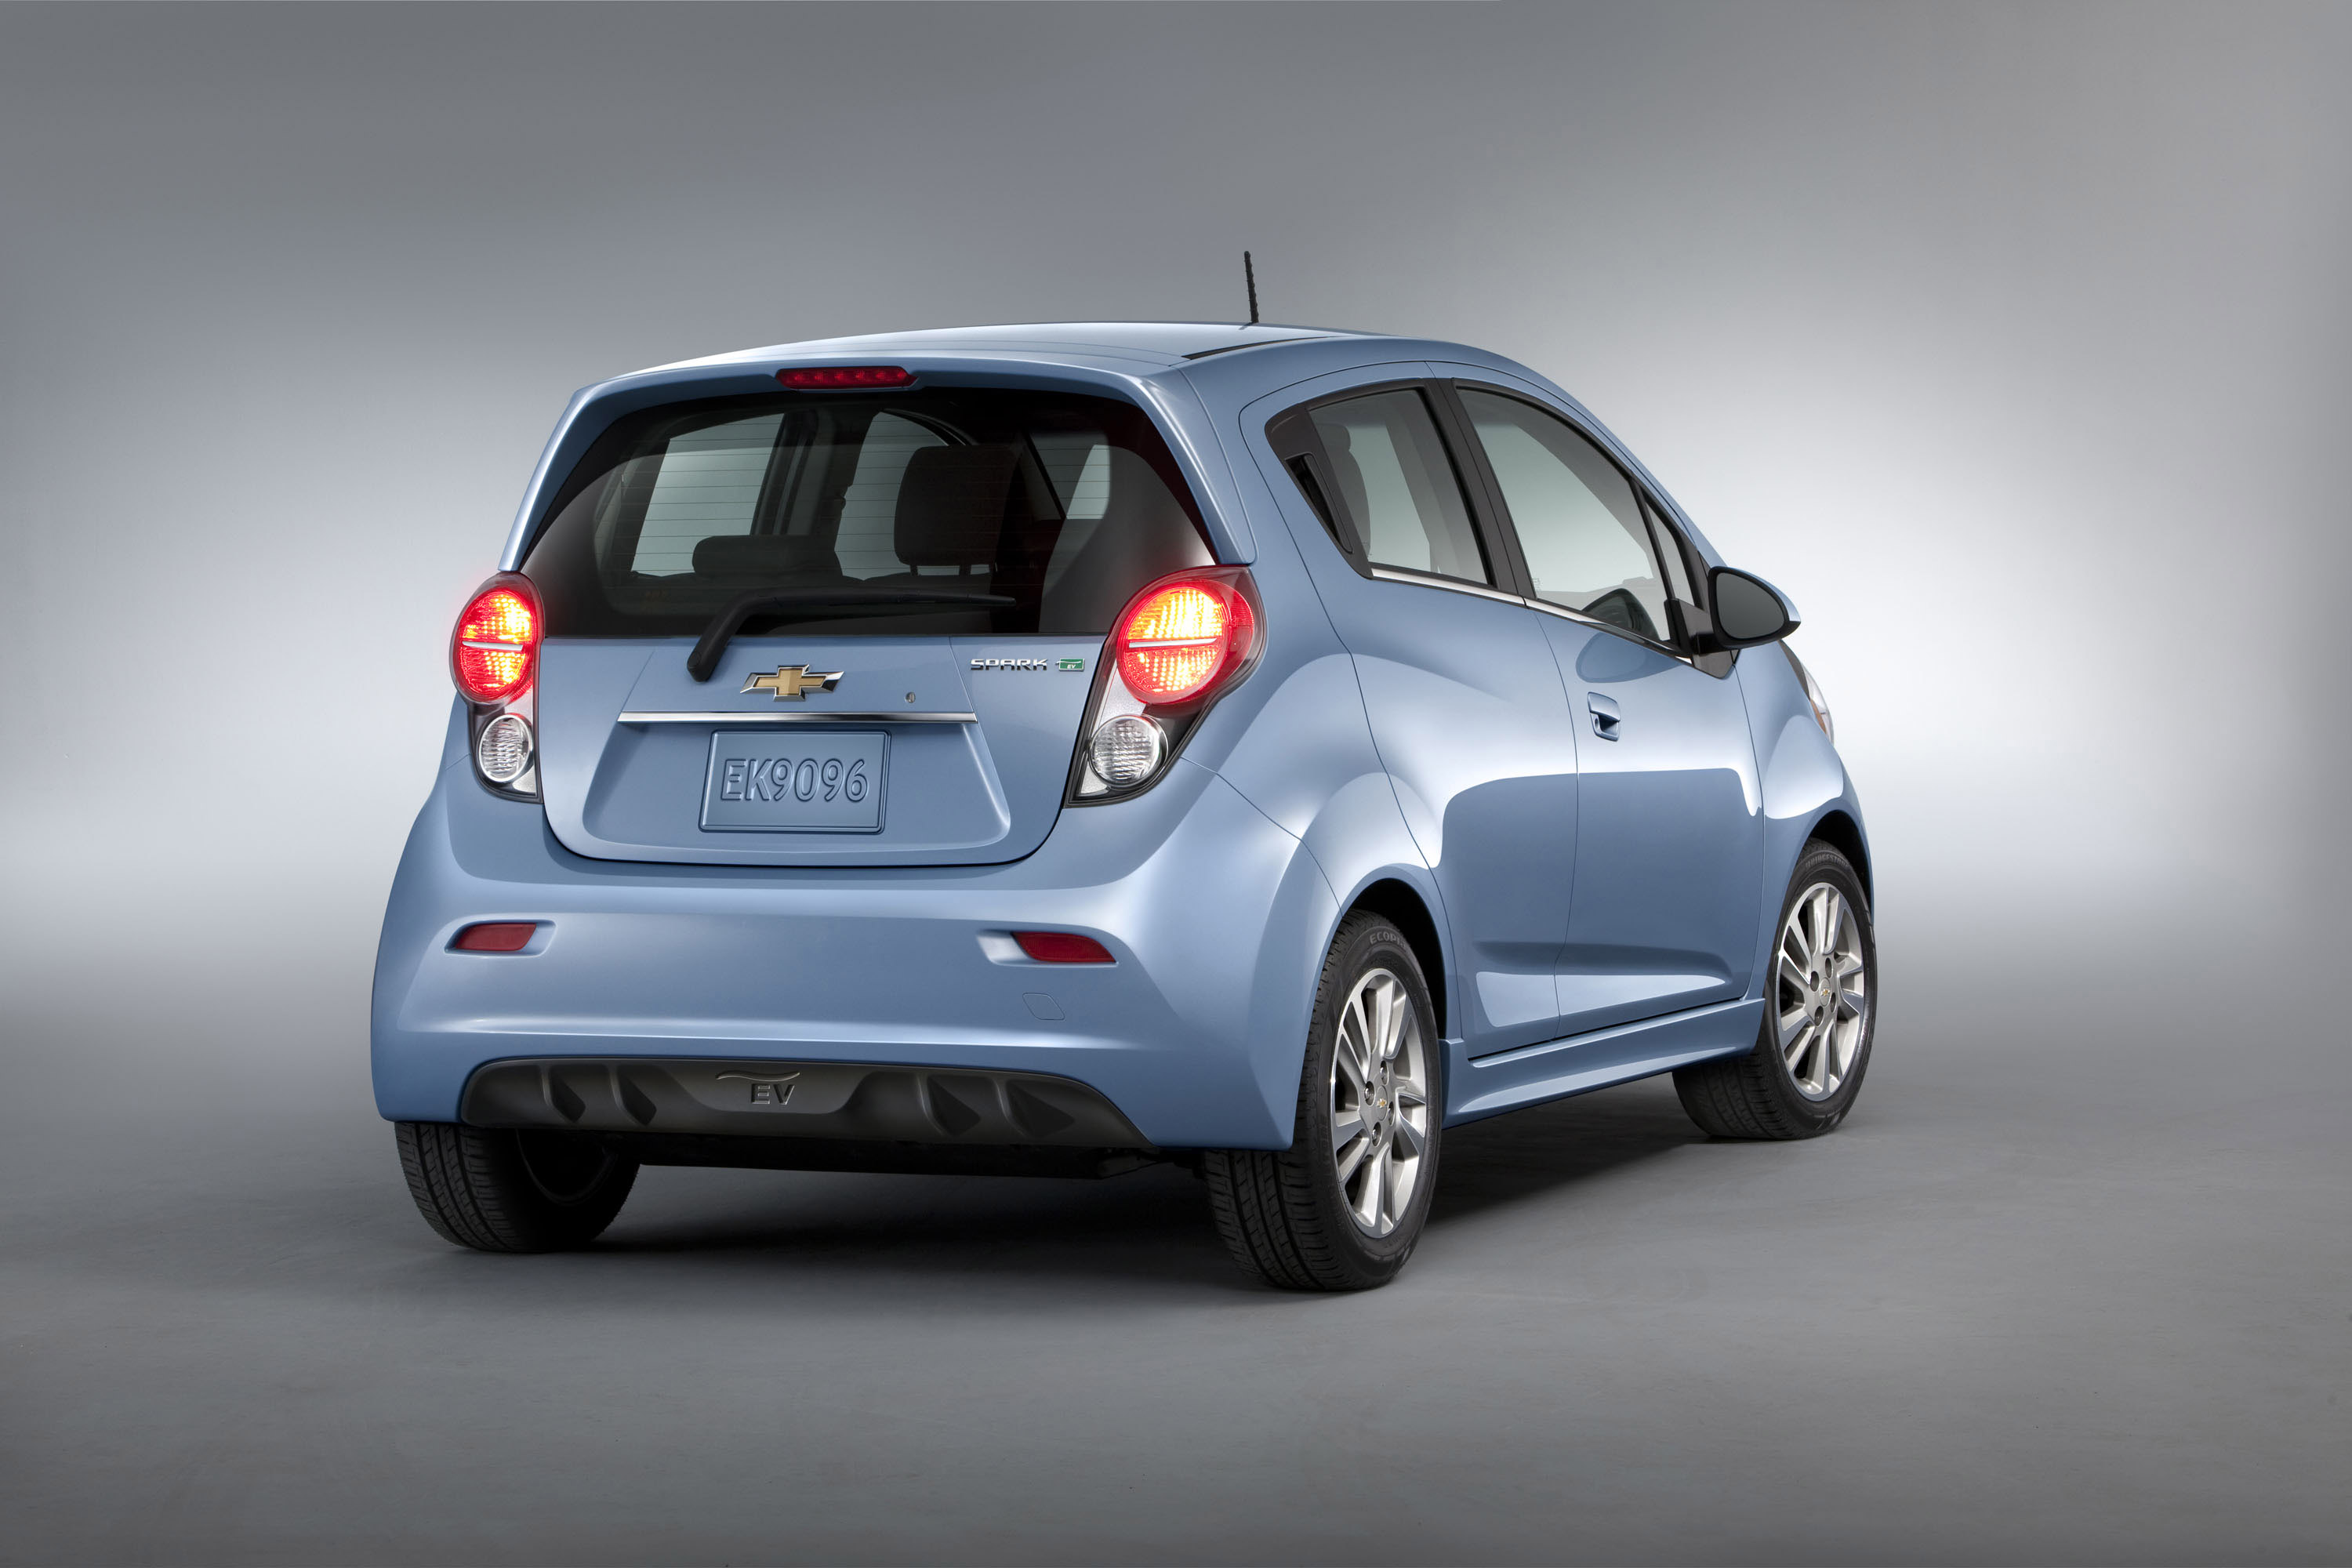 Chevrolet Spark exterior specifications